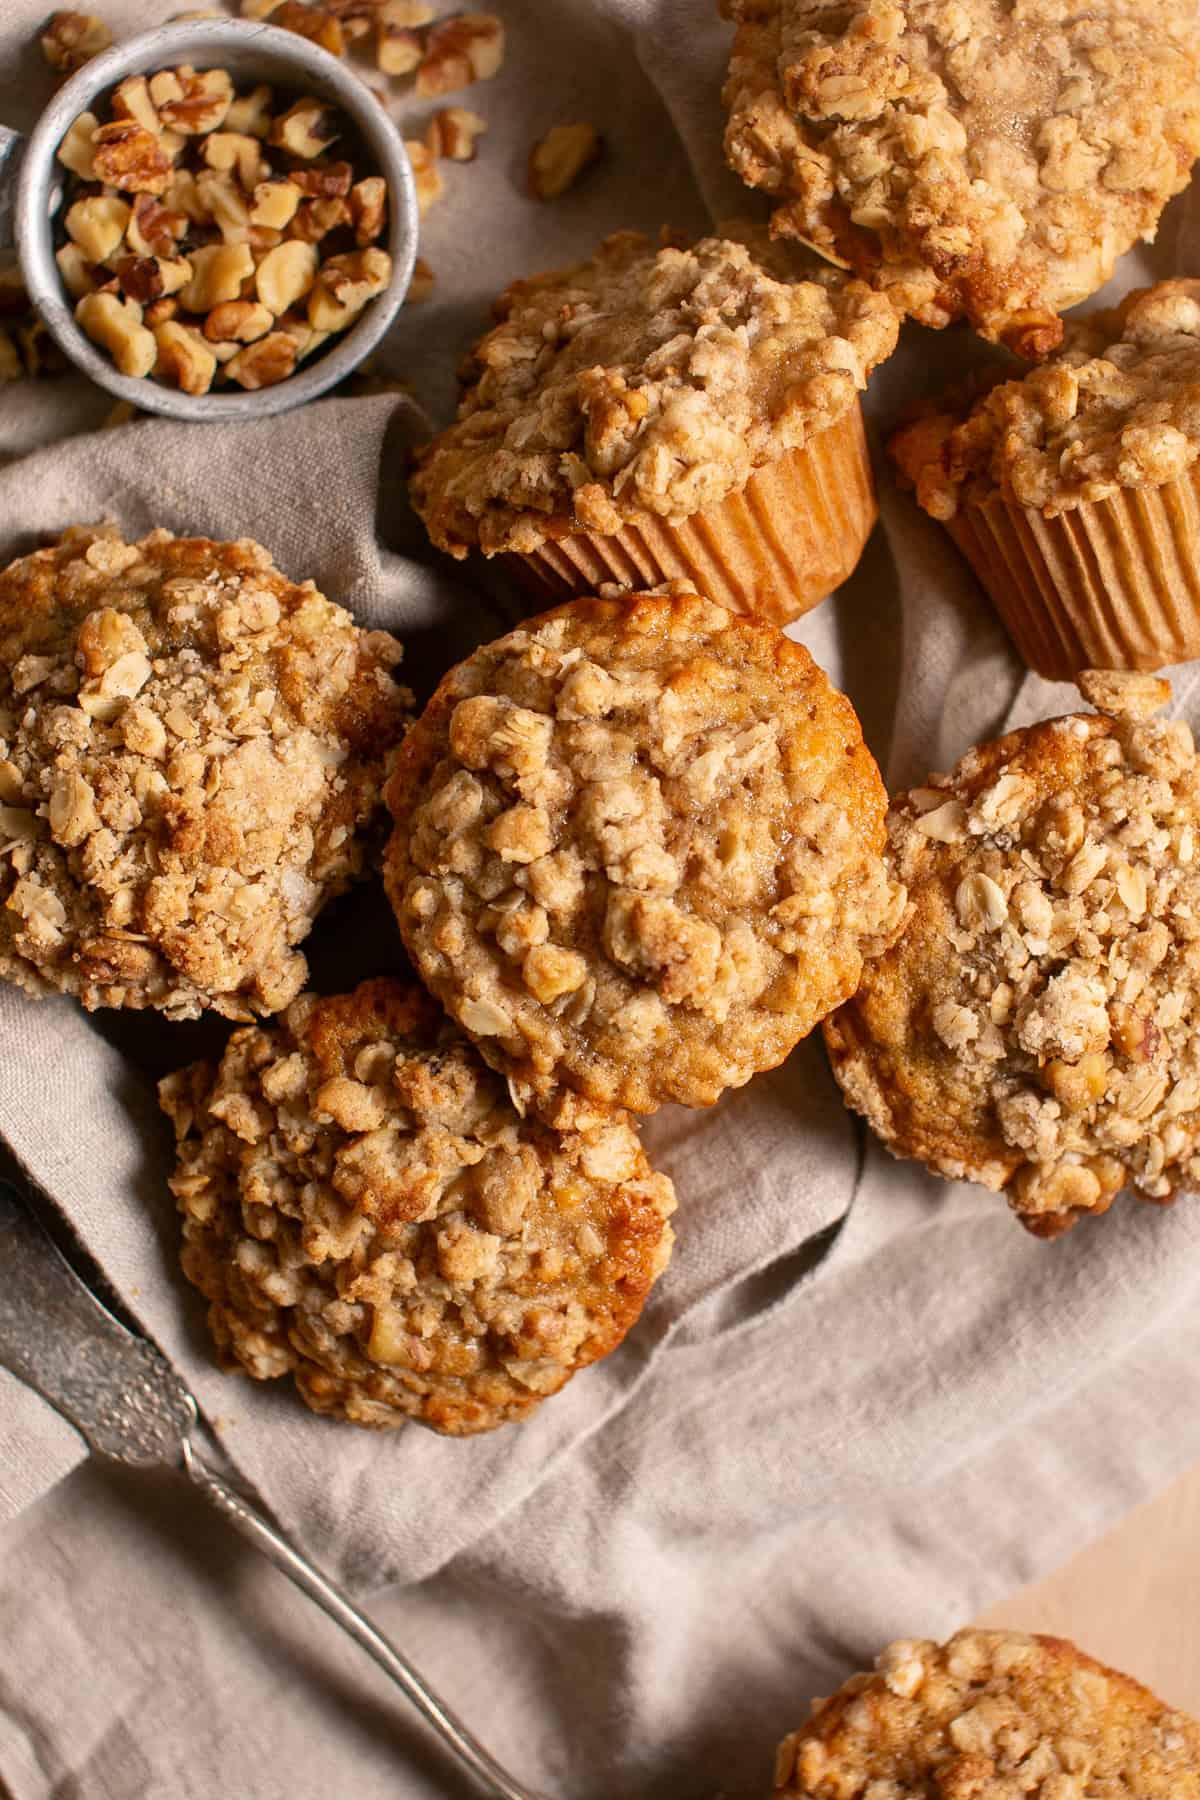 Banana Nut Muffins sitting by a bowl of walnuts.